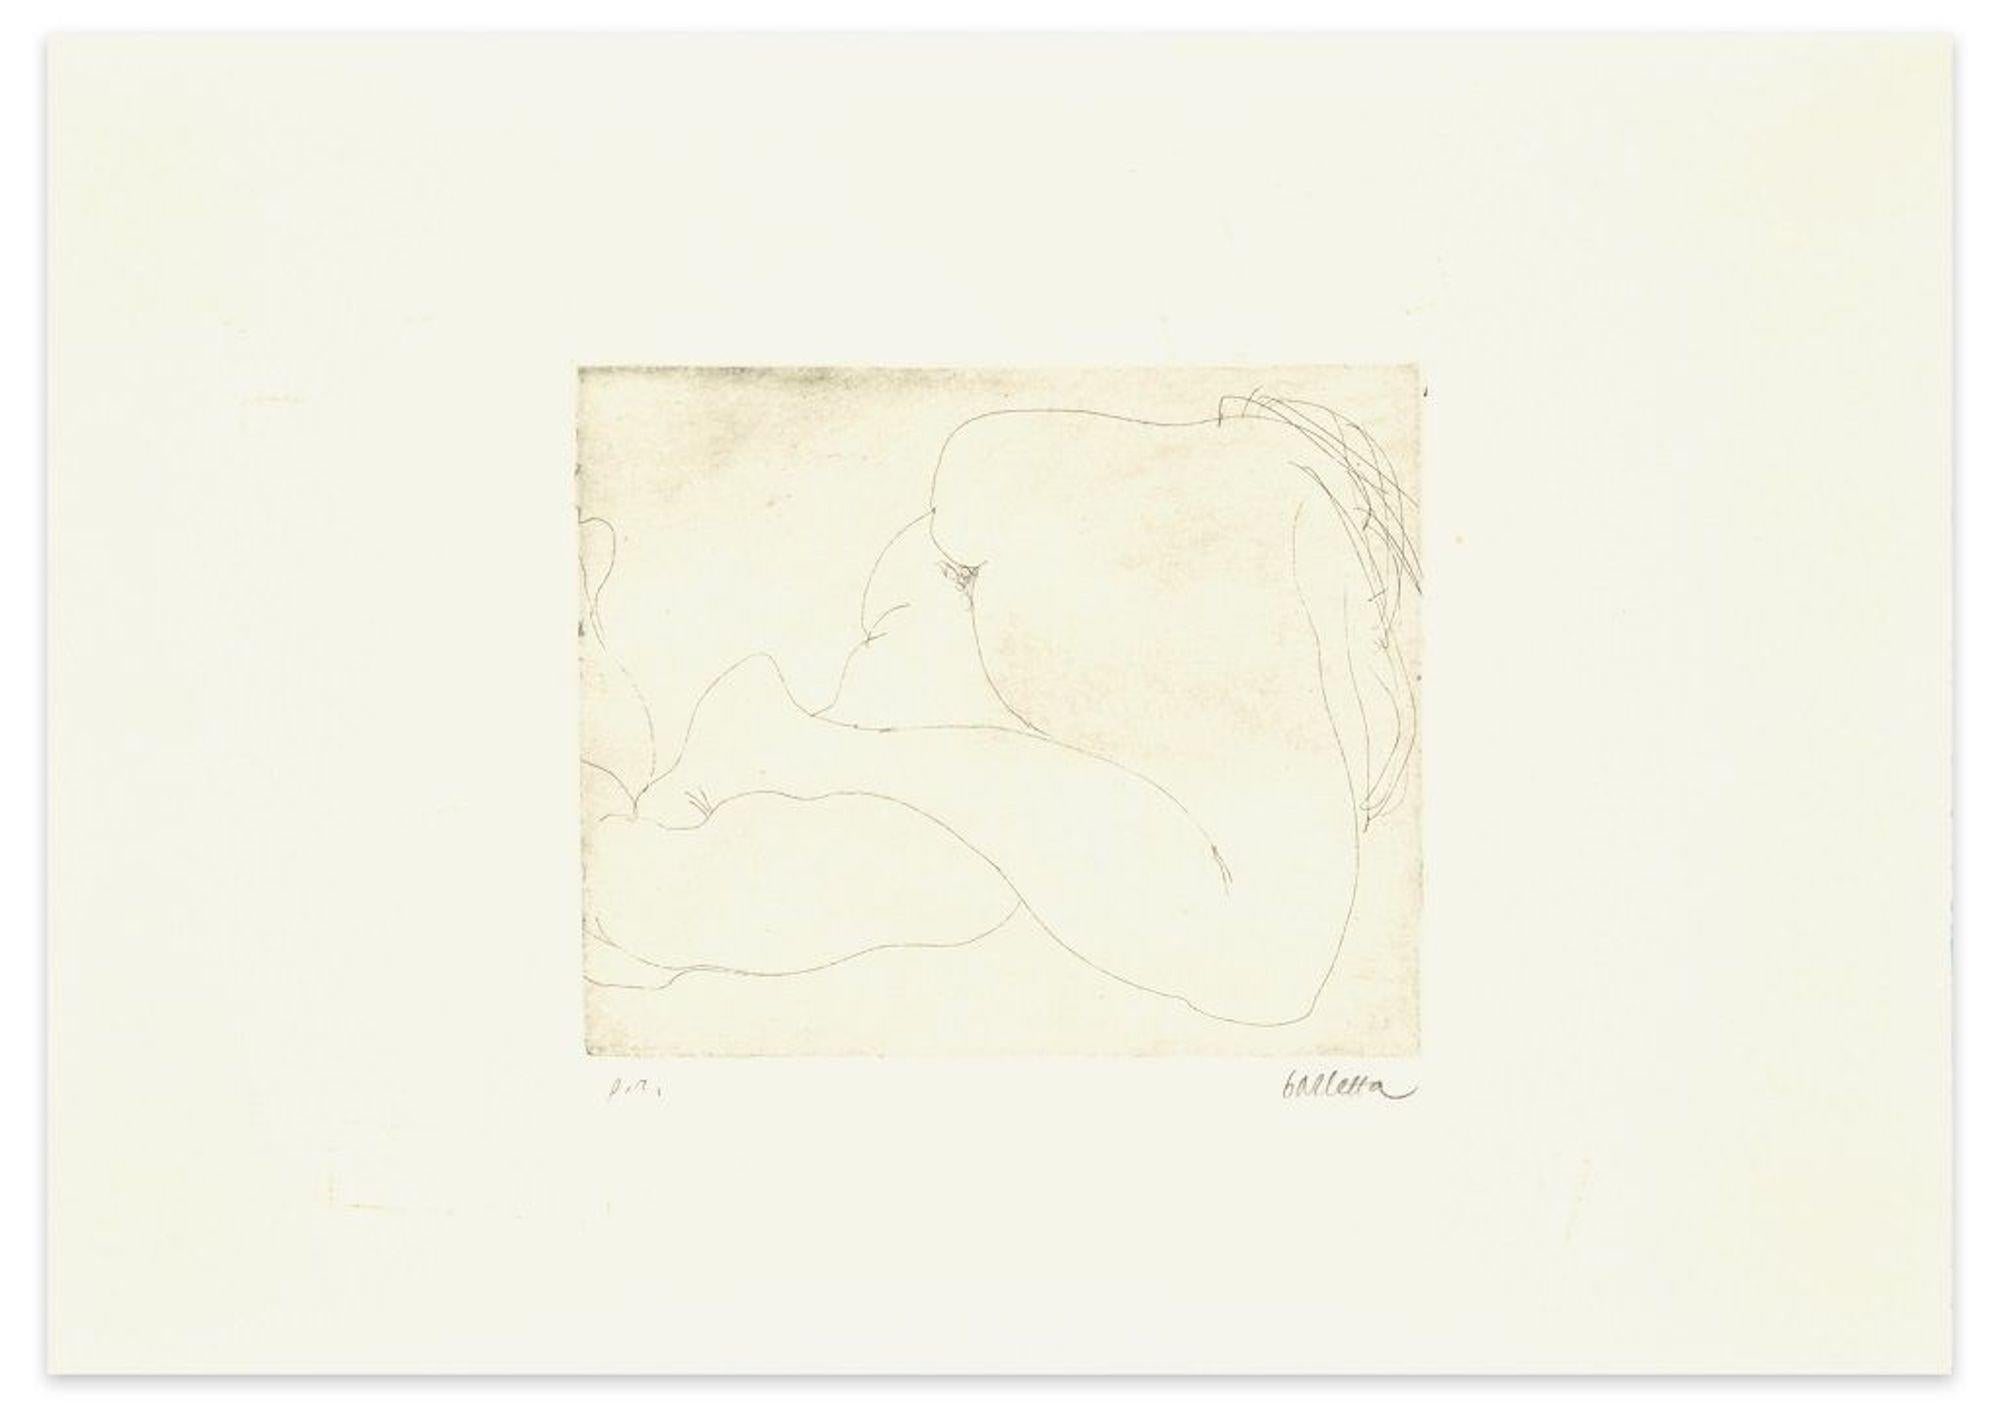 Nuda is a beautiful original color etching on paper, realized by the Italian artist Sergio Barletta (Bologna, 1934) at the Seventies.

Hand-signed in pencil on lower right margin, this is an artist's proof, as the abbreviation in pencil points at